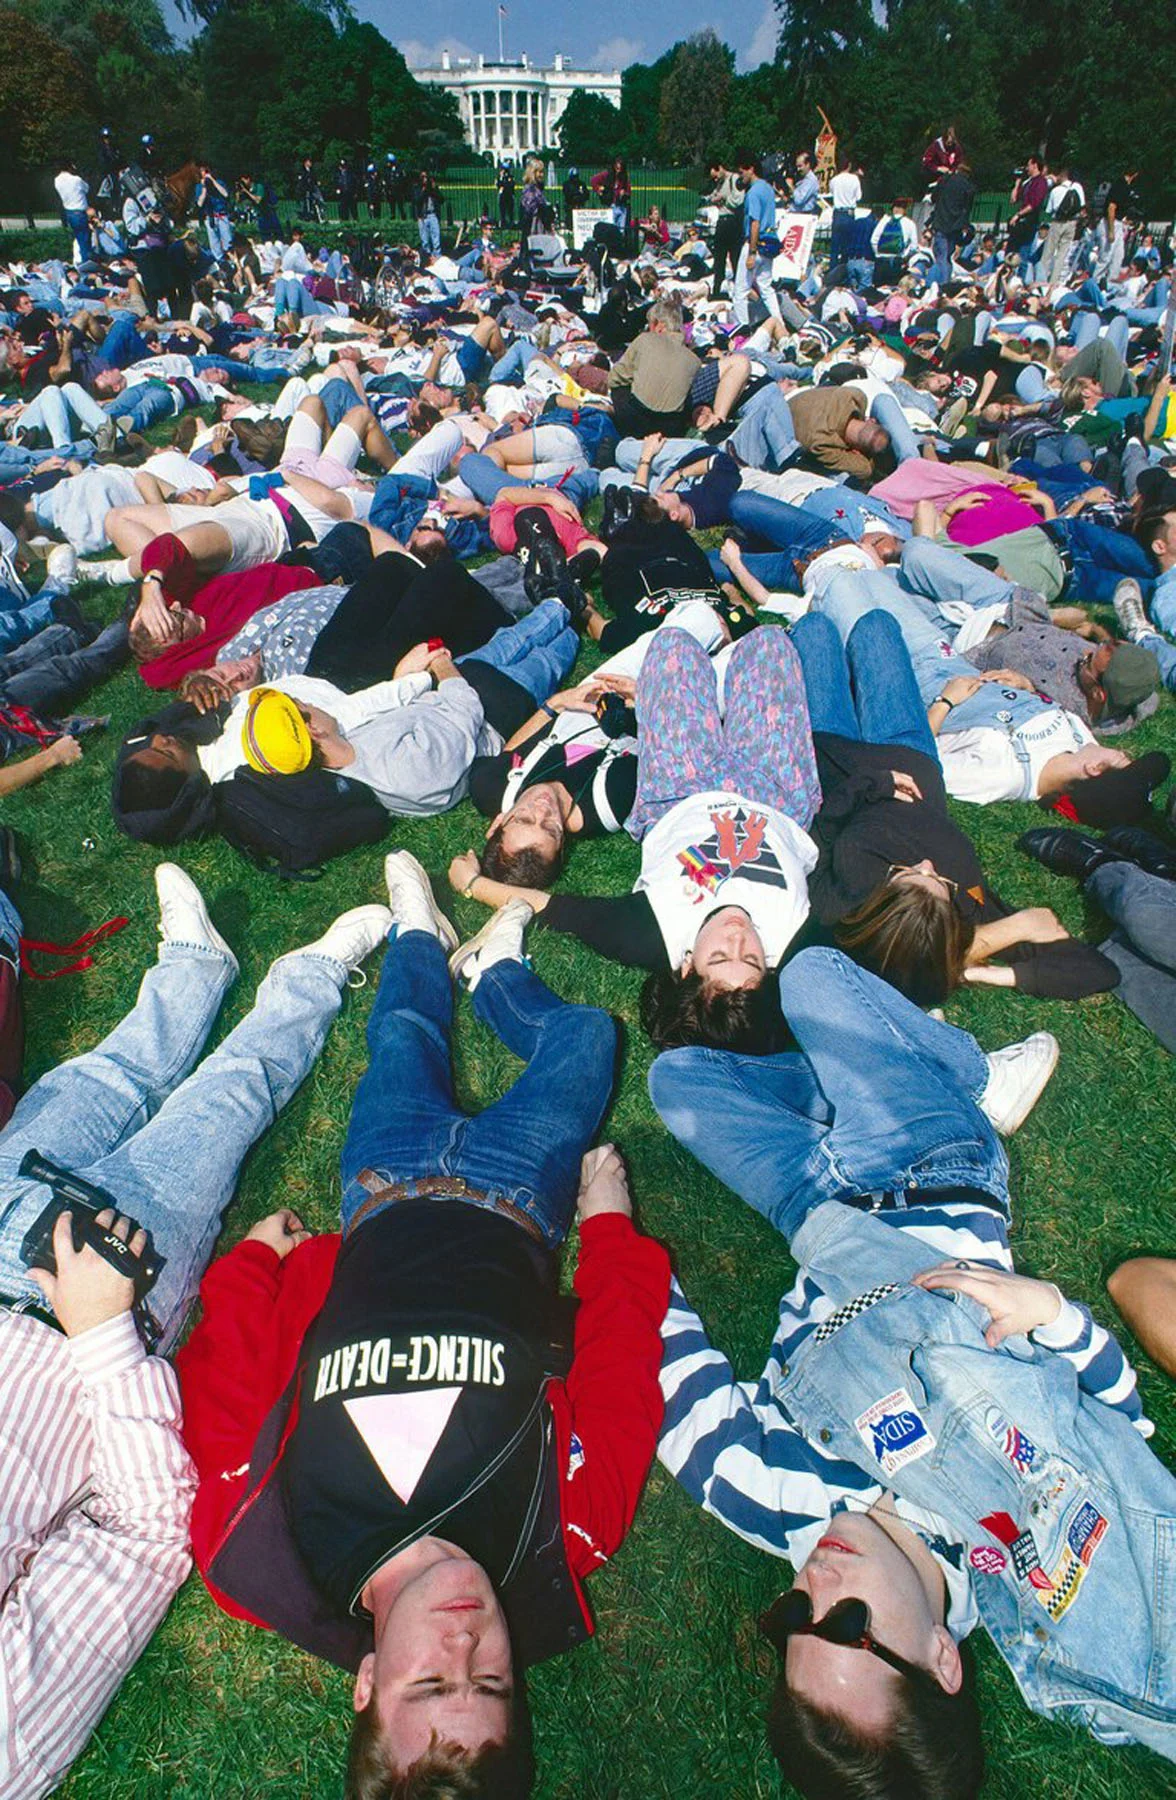 A color photograph of groups of protestors lying on the grass outside of the White House in Washington, D.C.